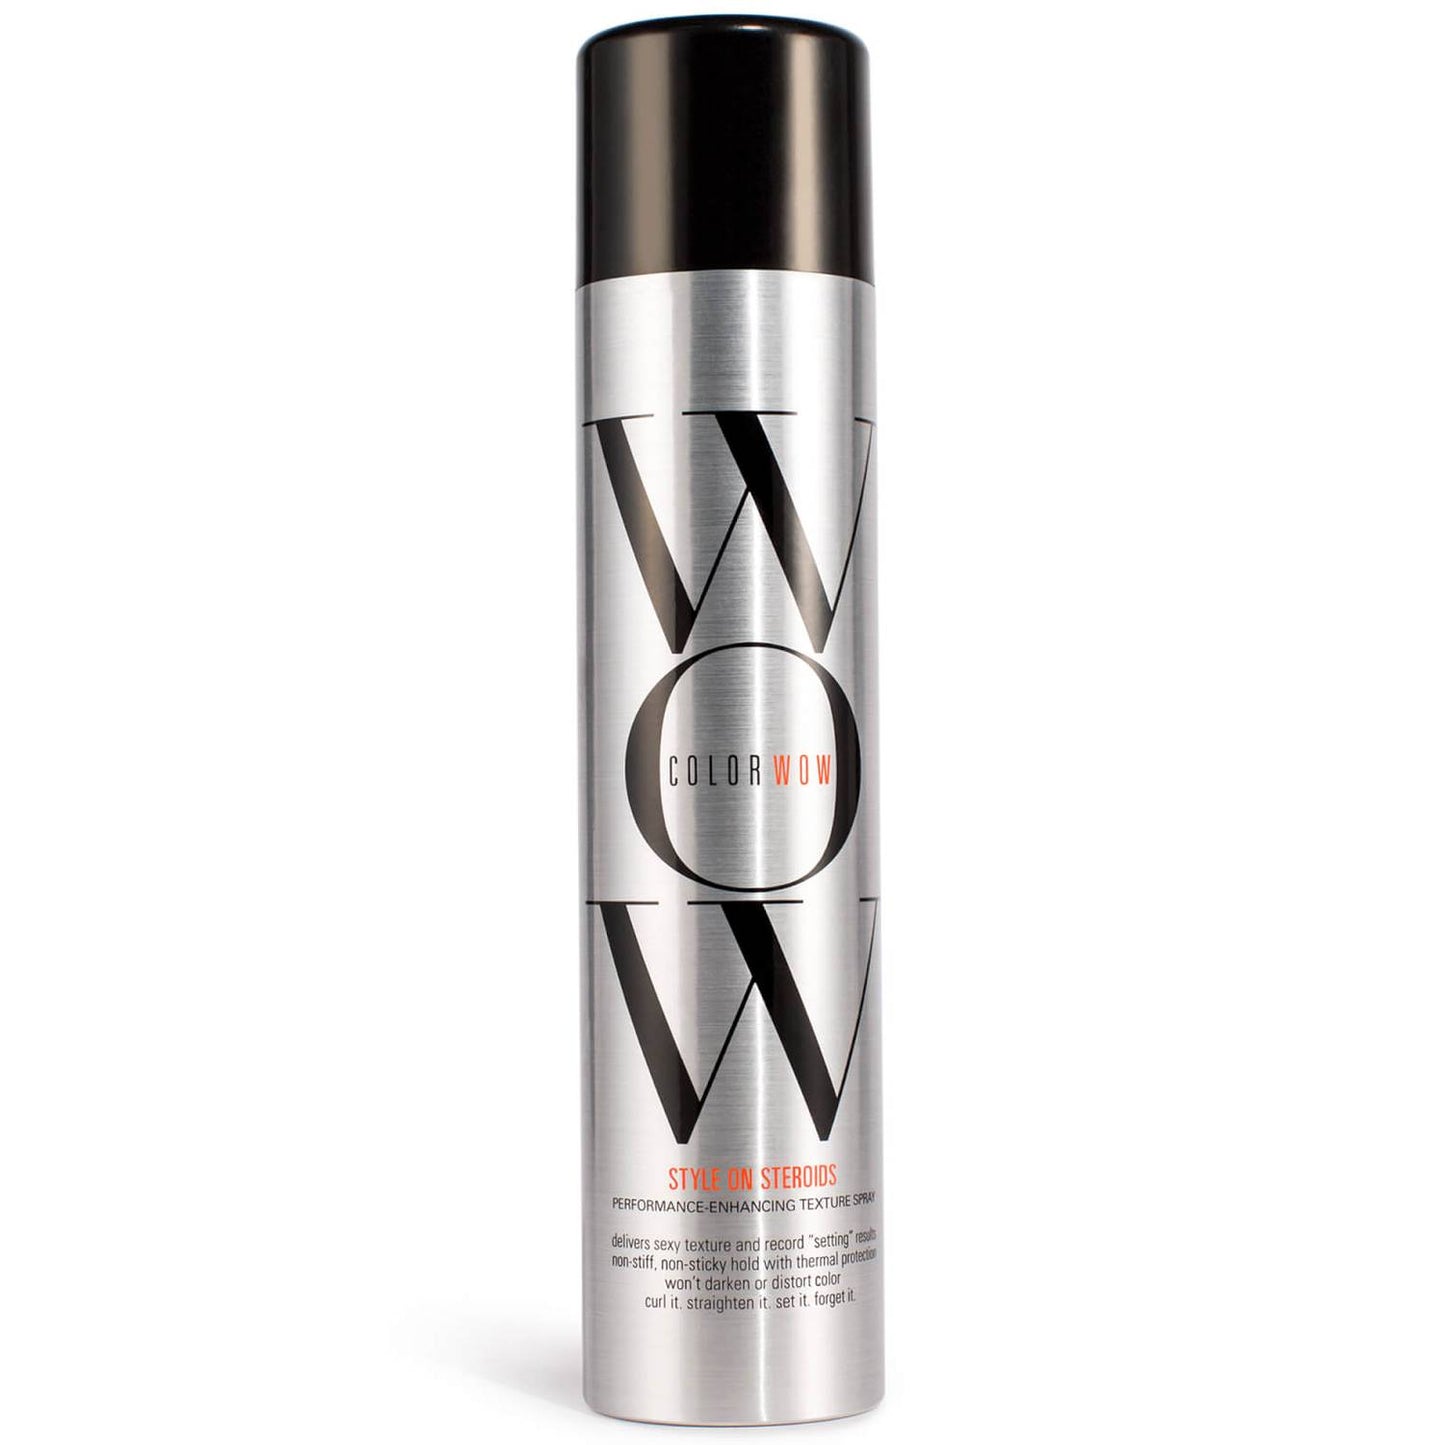 ColorWow Style On Steroids Texture Finishing Spray 262ml